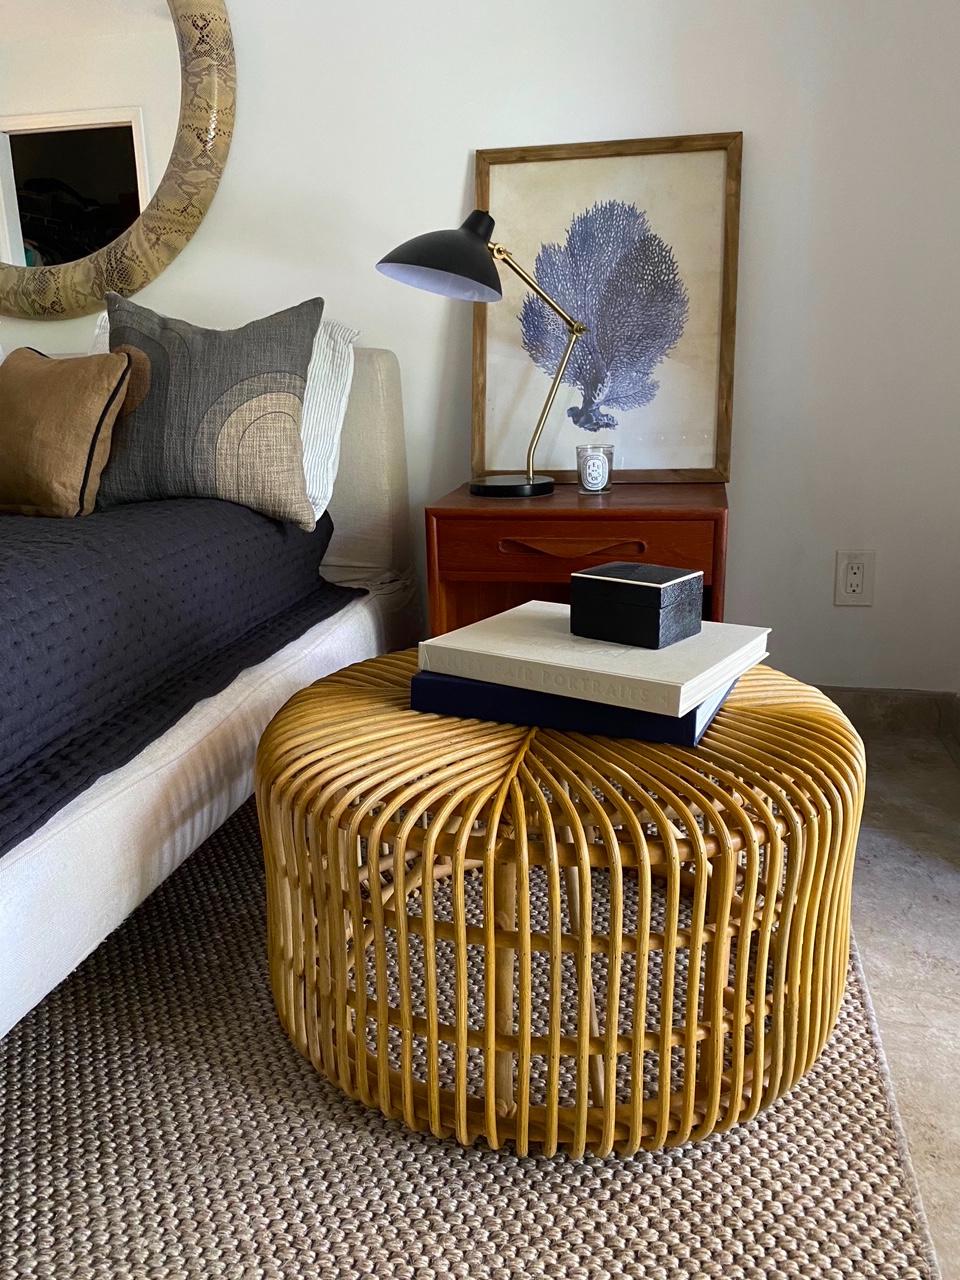 Vintage hand-crafted round bamboo coffee table or ottoman with rattan accents and contemporary Organic Modern design. Rounded form with flat sides features bent bamboo with open slats running in opposite directions, creating a geometric pattern.